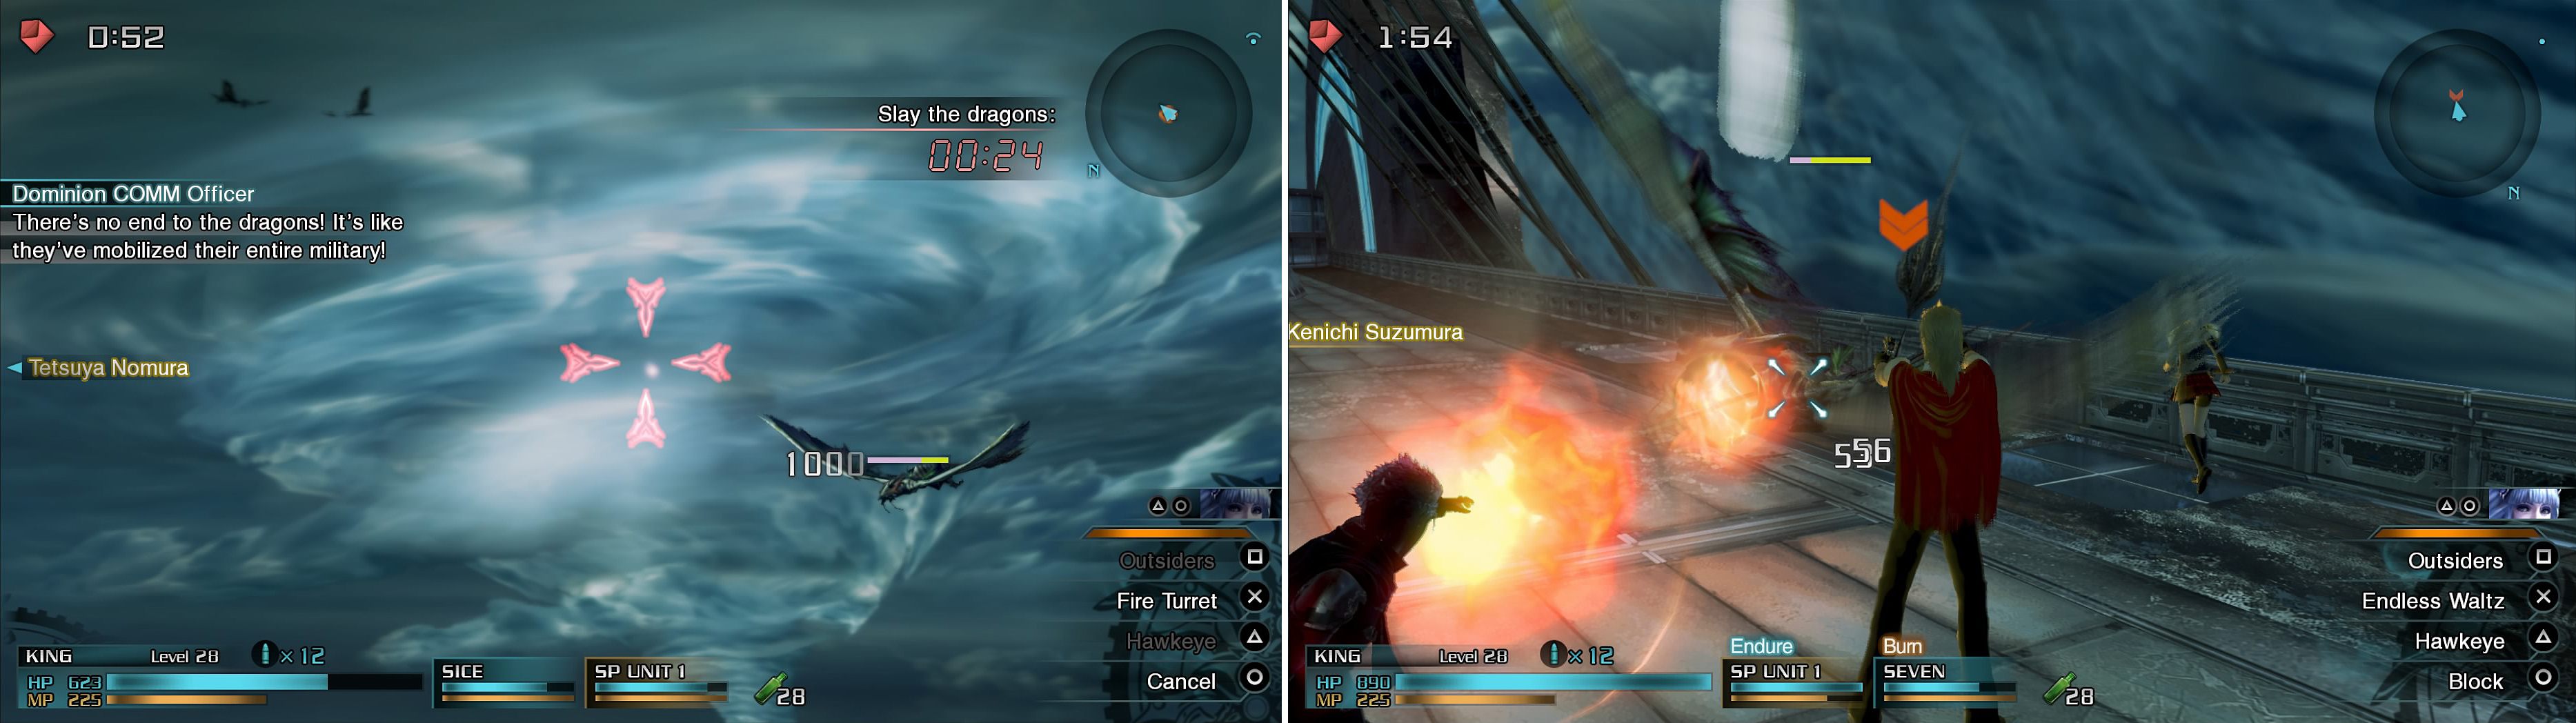 If you place the crosshairs here (left) you will be able to hit almost all the dragons as they come down this line of sight. An enemy commander will crash on the deck of the ship (right).